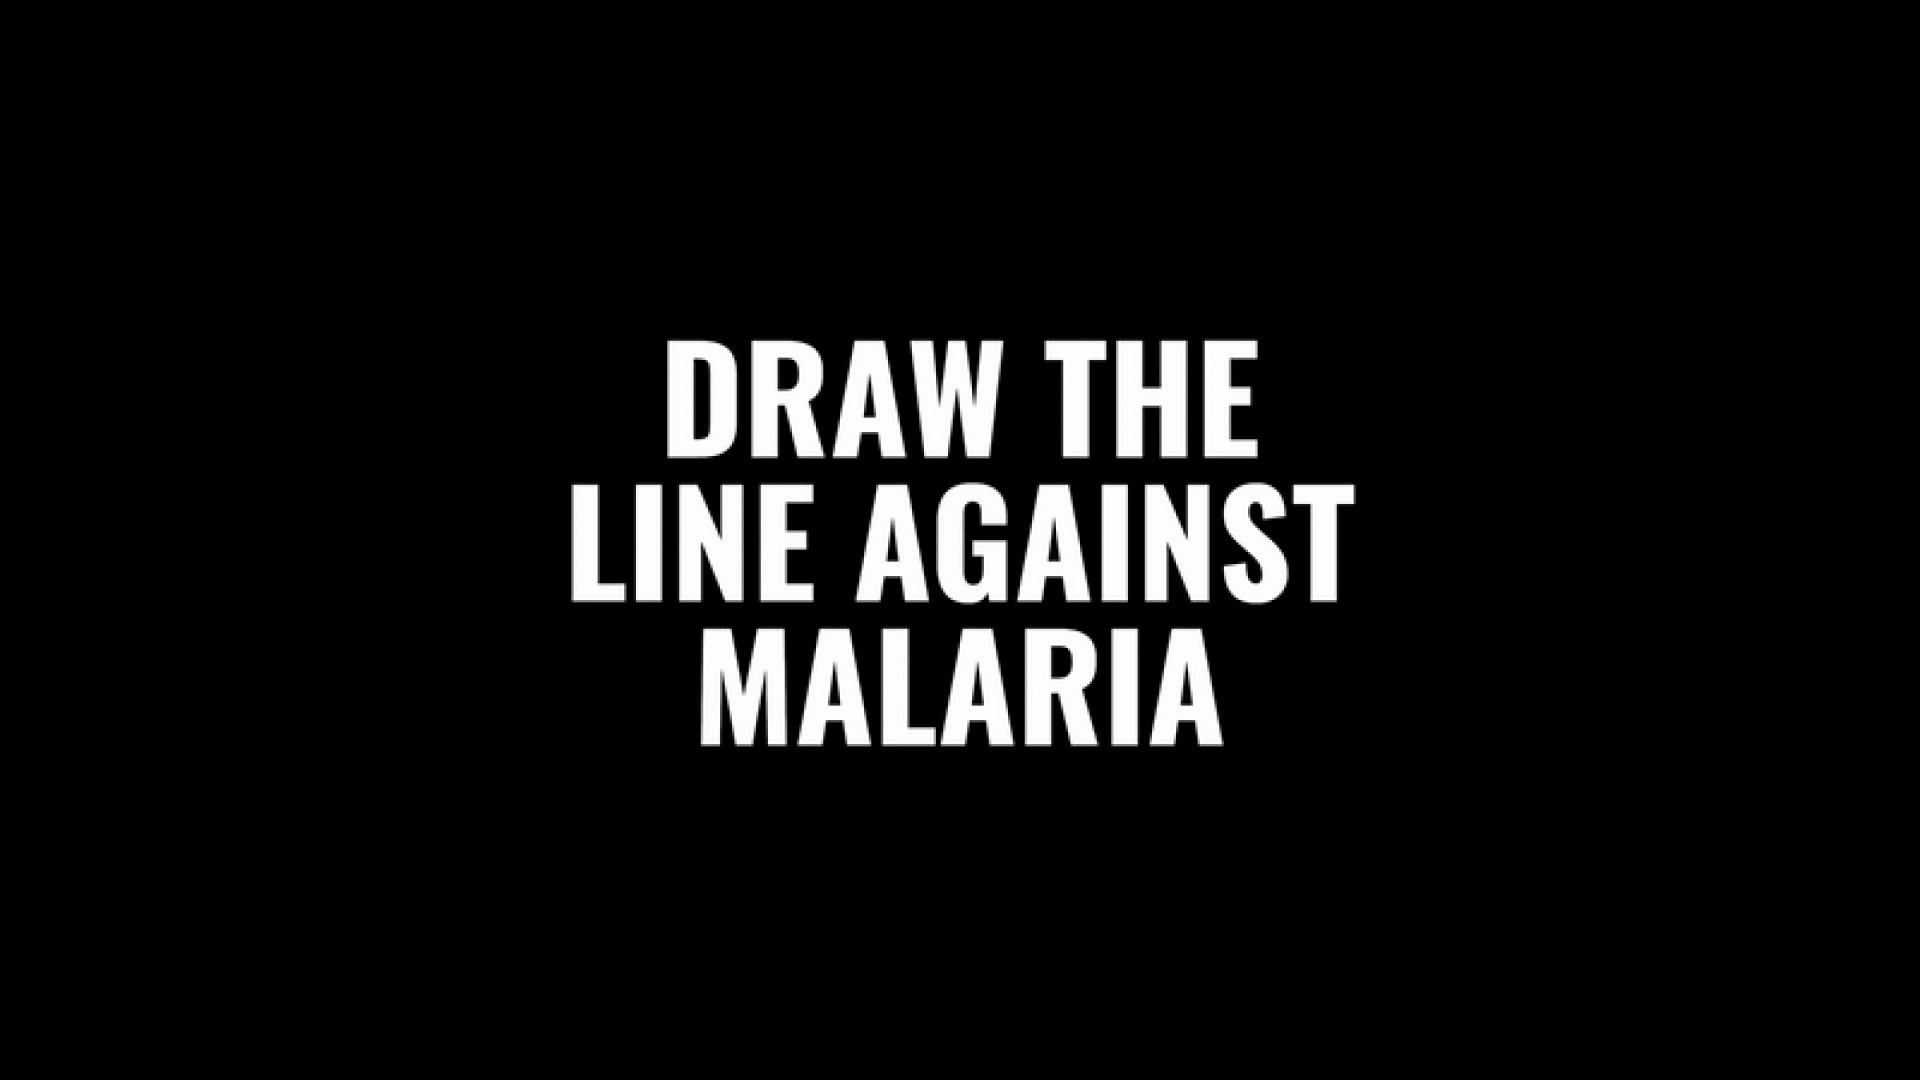 Draw the line against malaria text